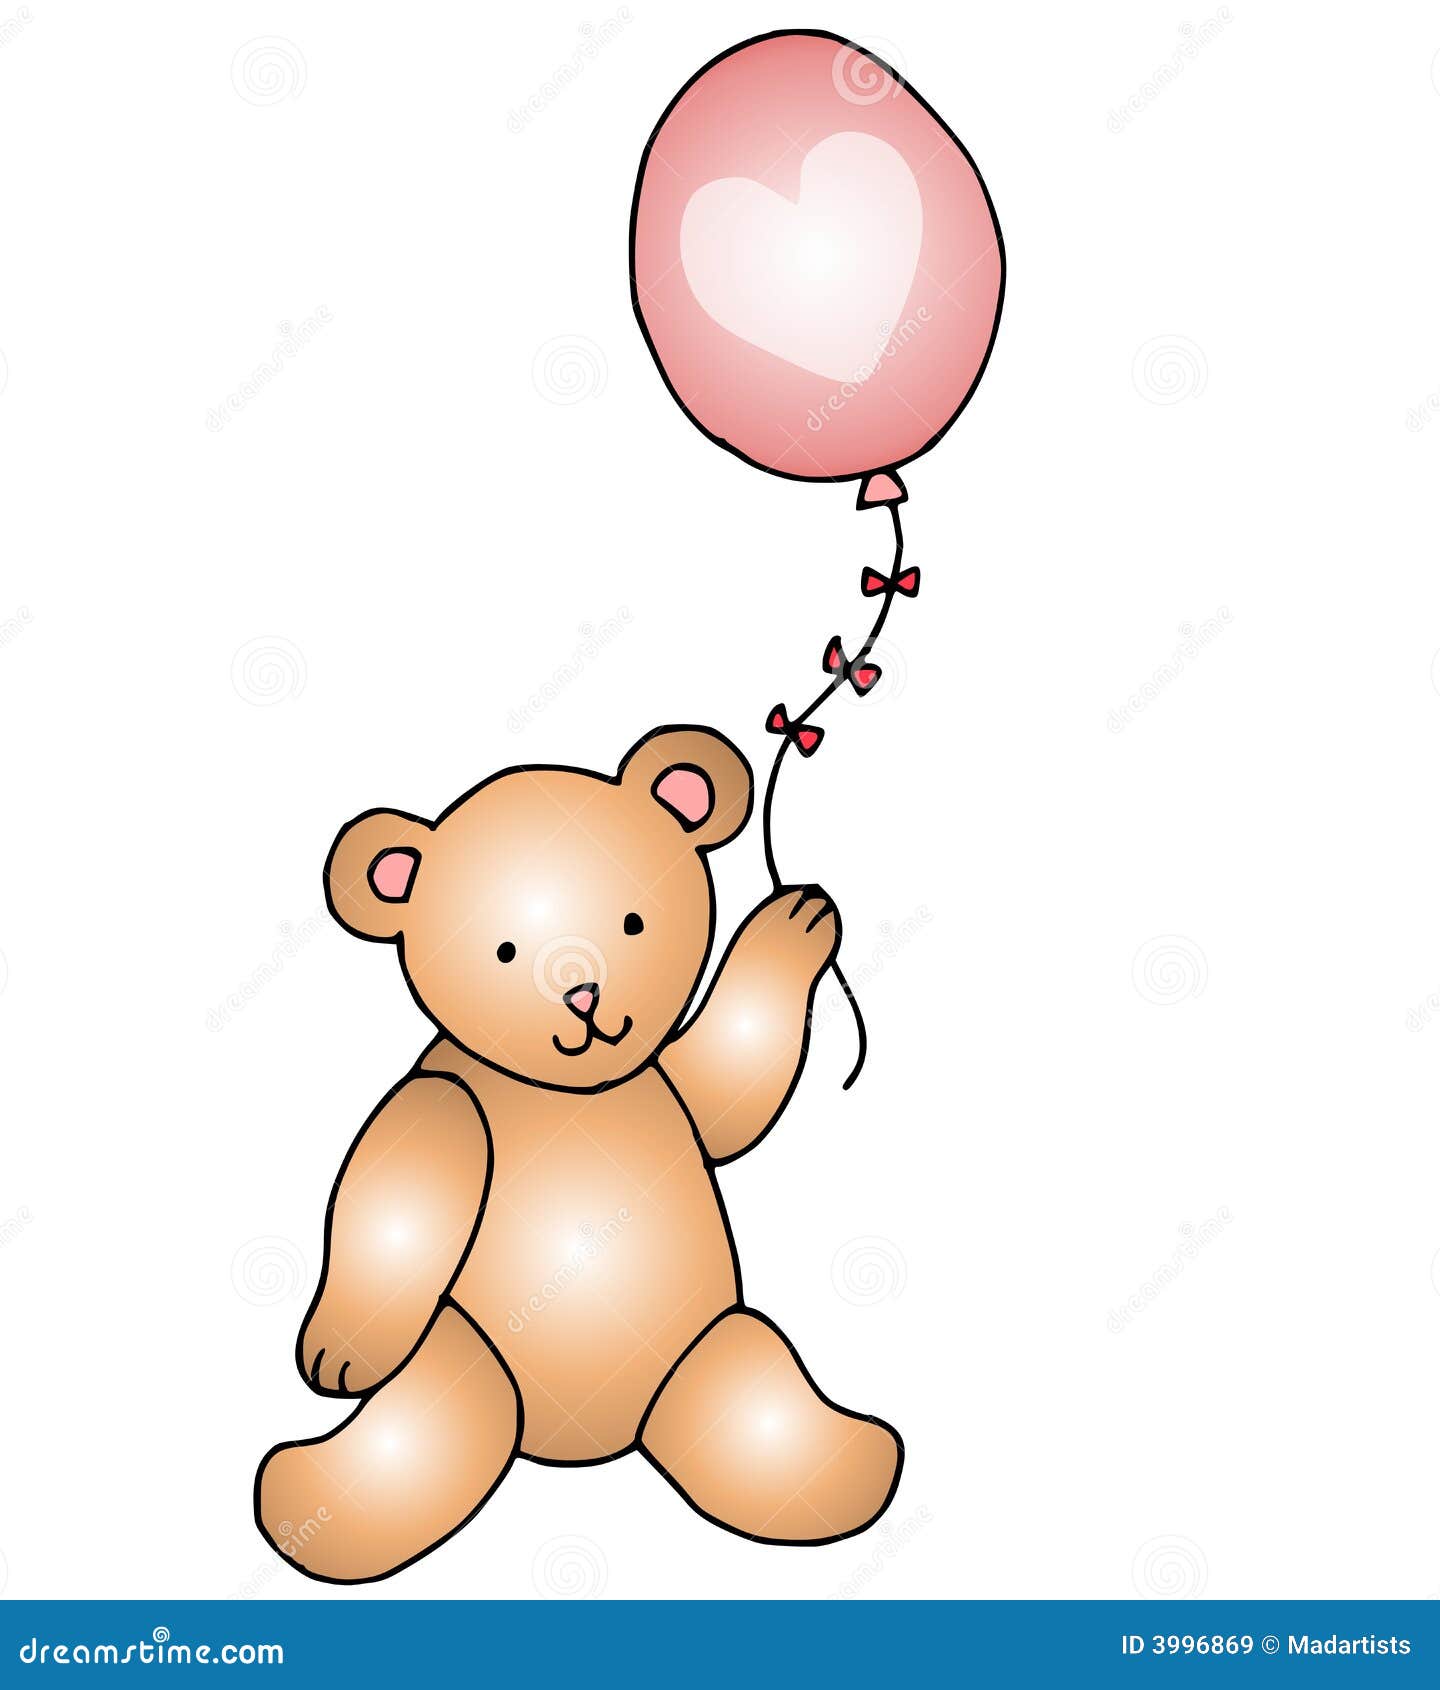 teddy bear with balloons free clipart - photo #7